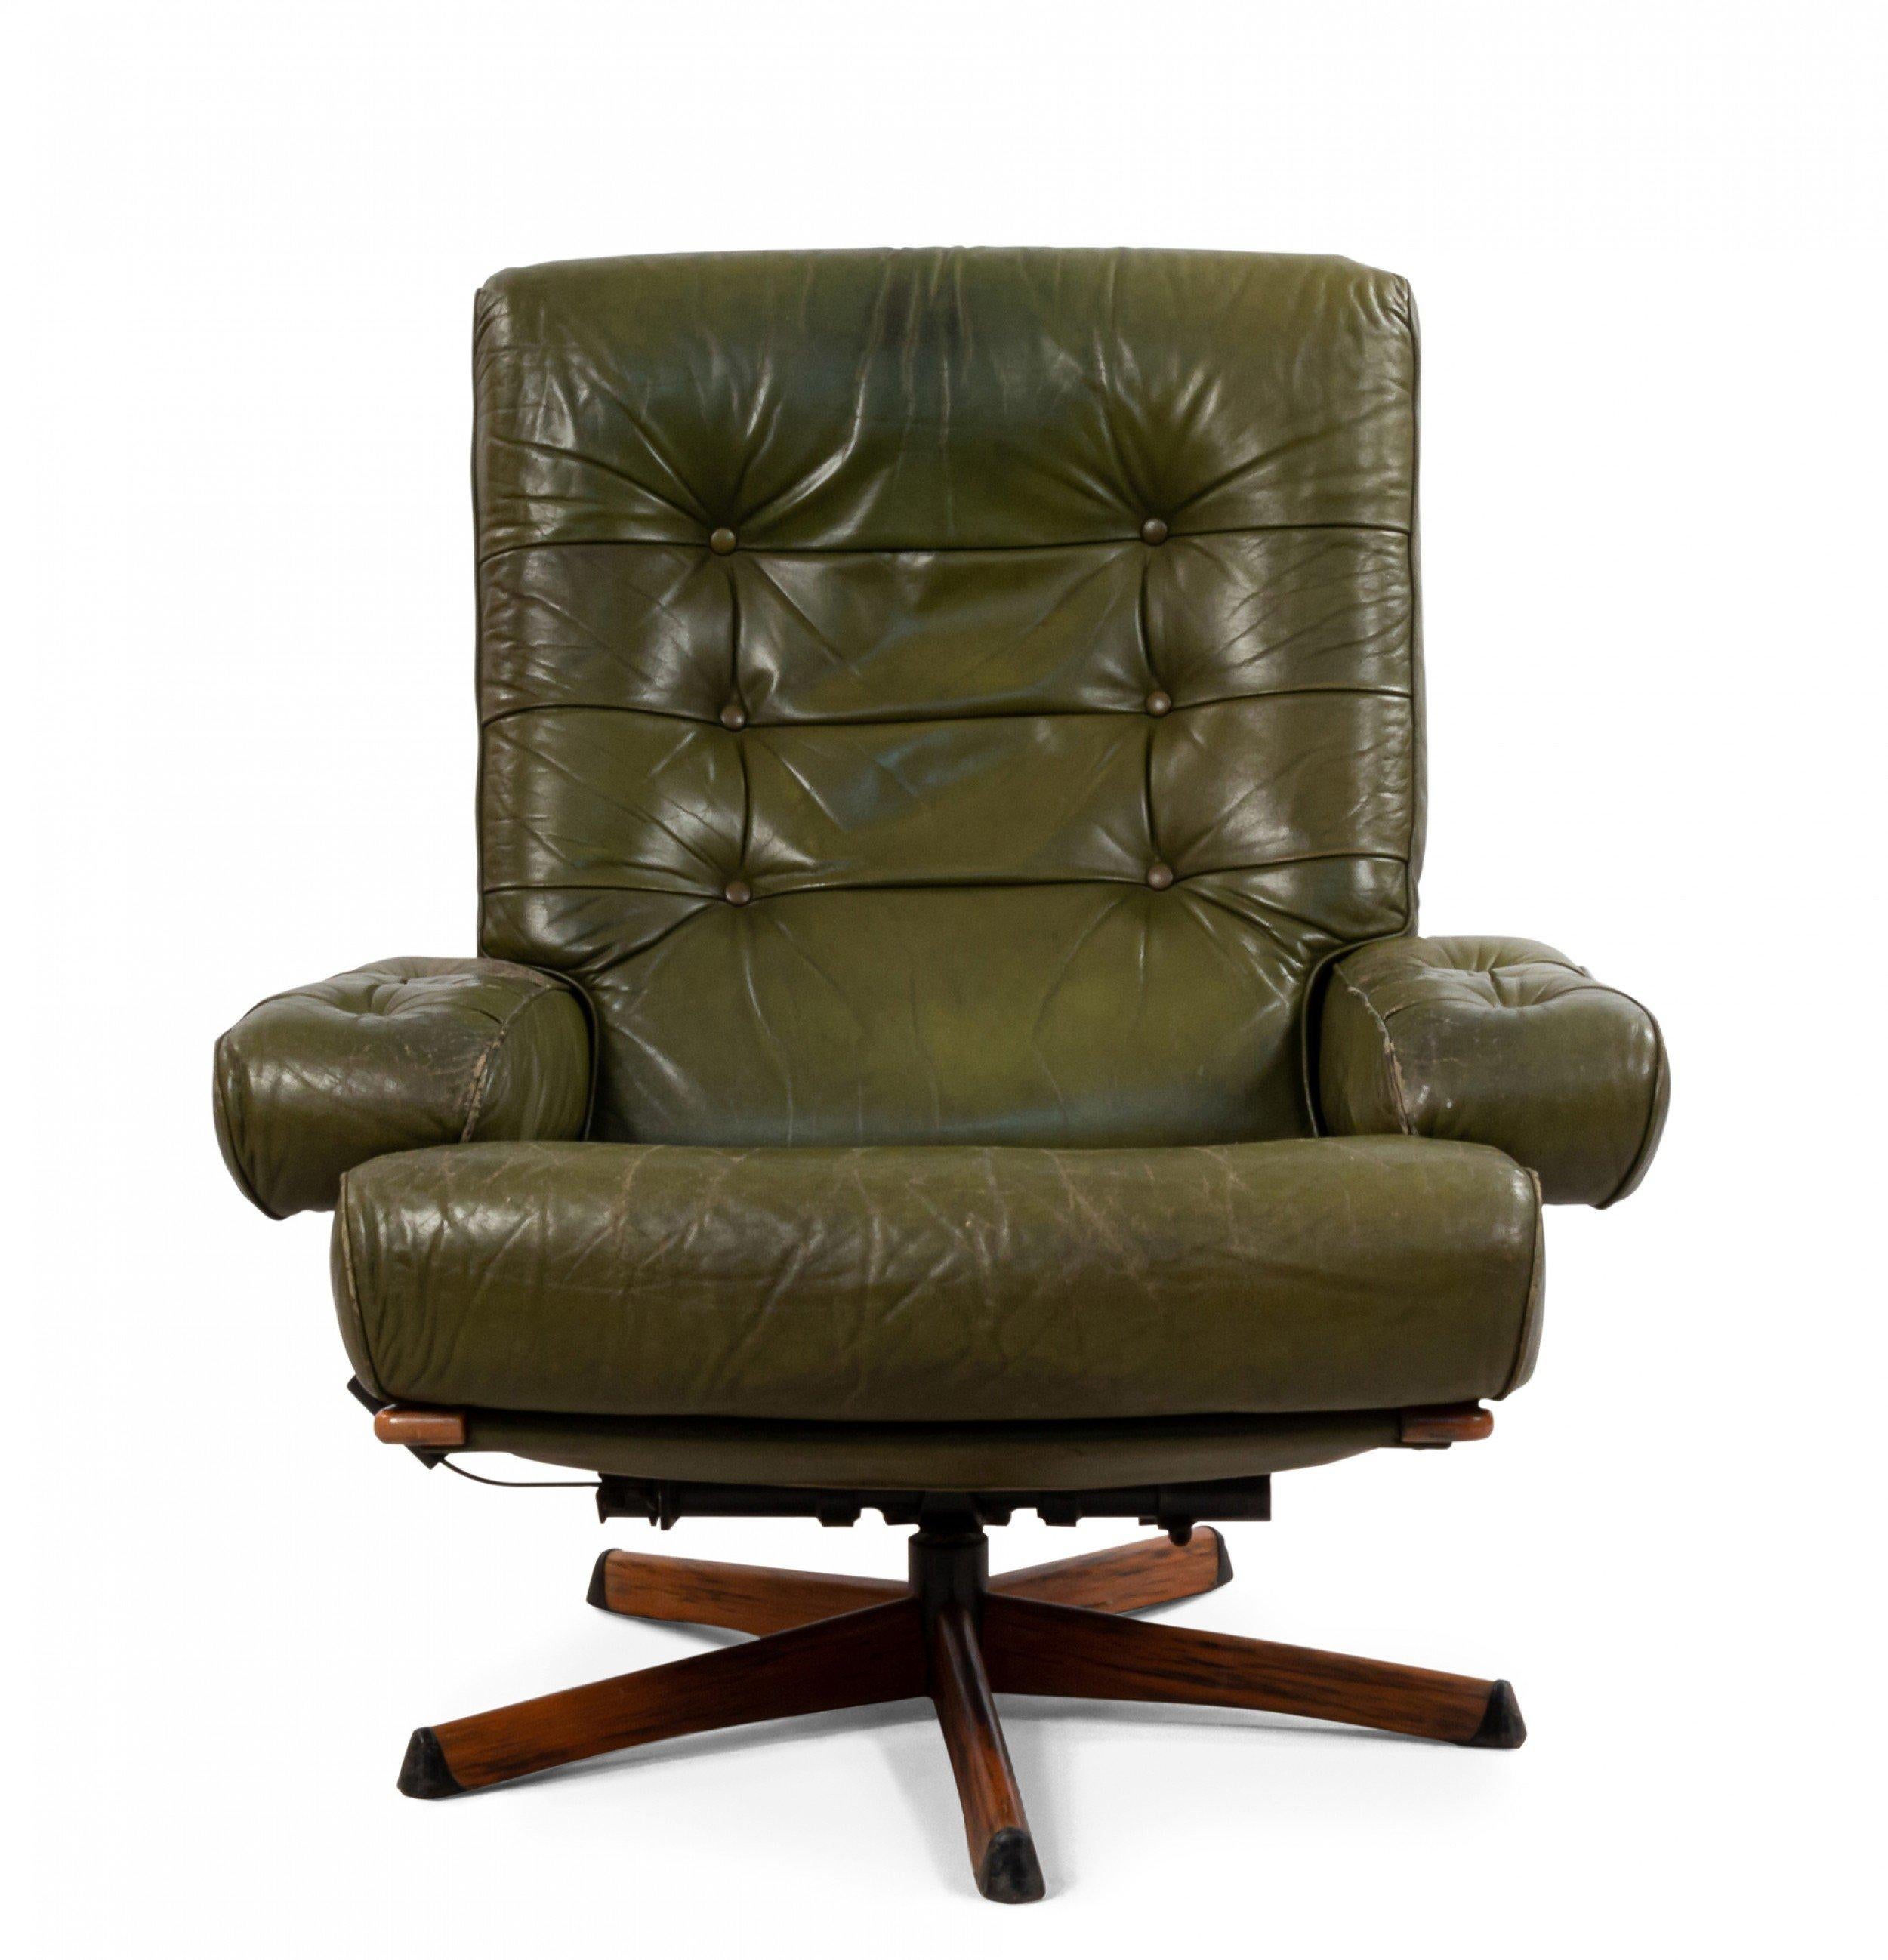 20th Century Mid-Century Green Tufted Leather Armchair